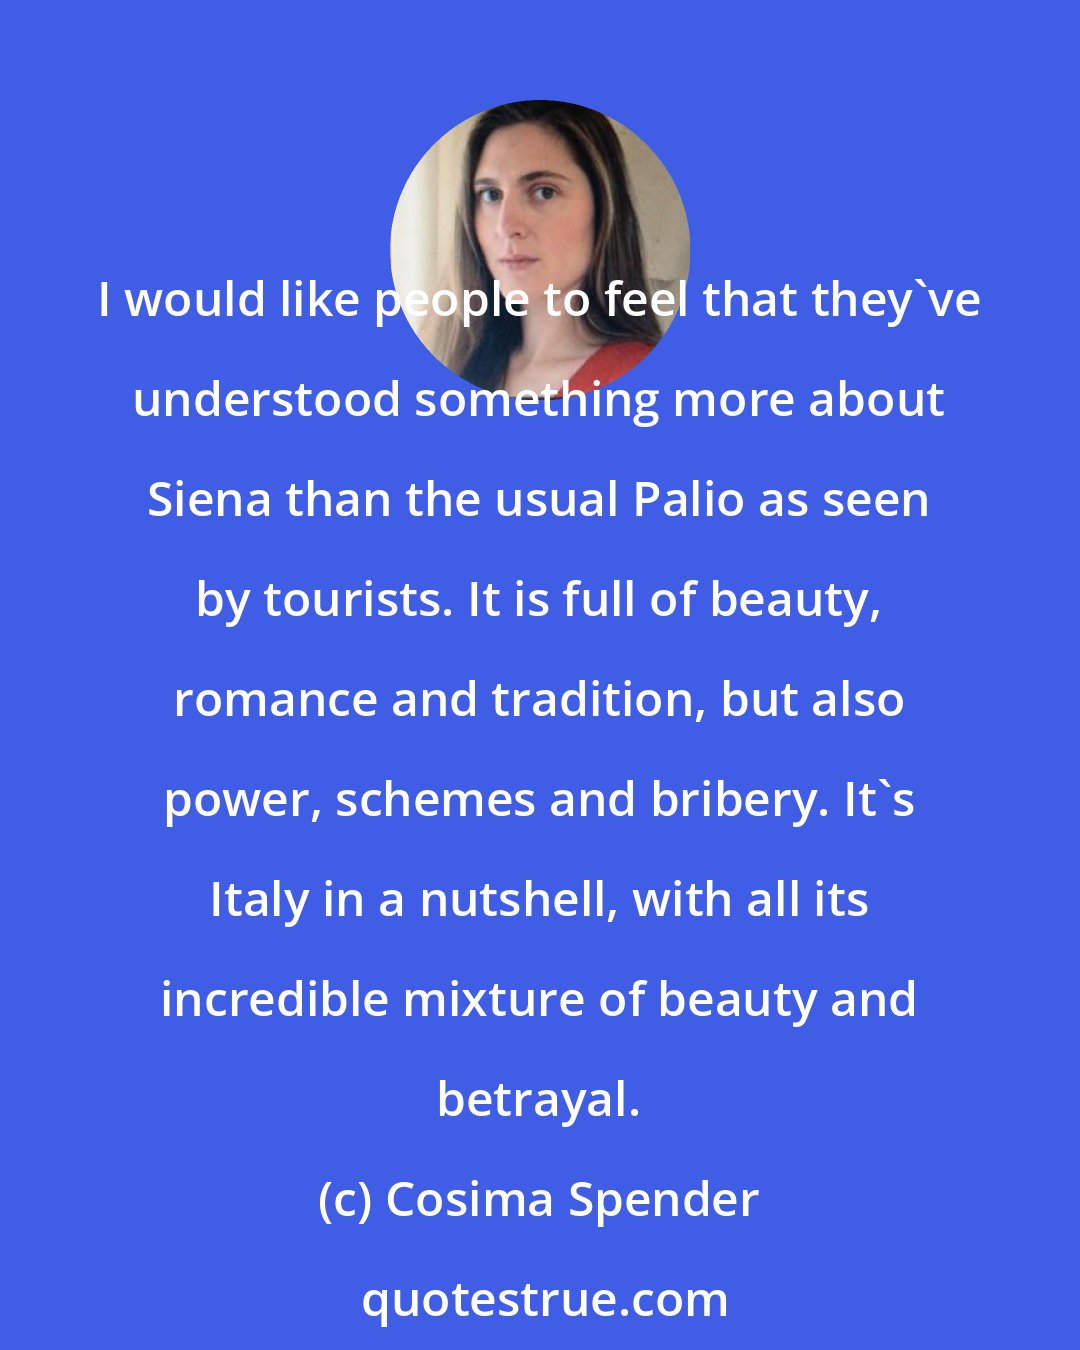 Cosima Spender: I would like people to feel that they've understood something more about Siena than the usual Palio as seen by tourists. It is full of beauty, romance and tradition, but also power, schemes and bribery. It's Italy in a nutshell, with all its incredible mixture of beauty and betrayal.